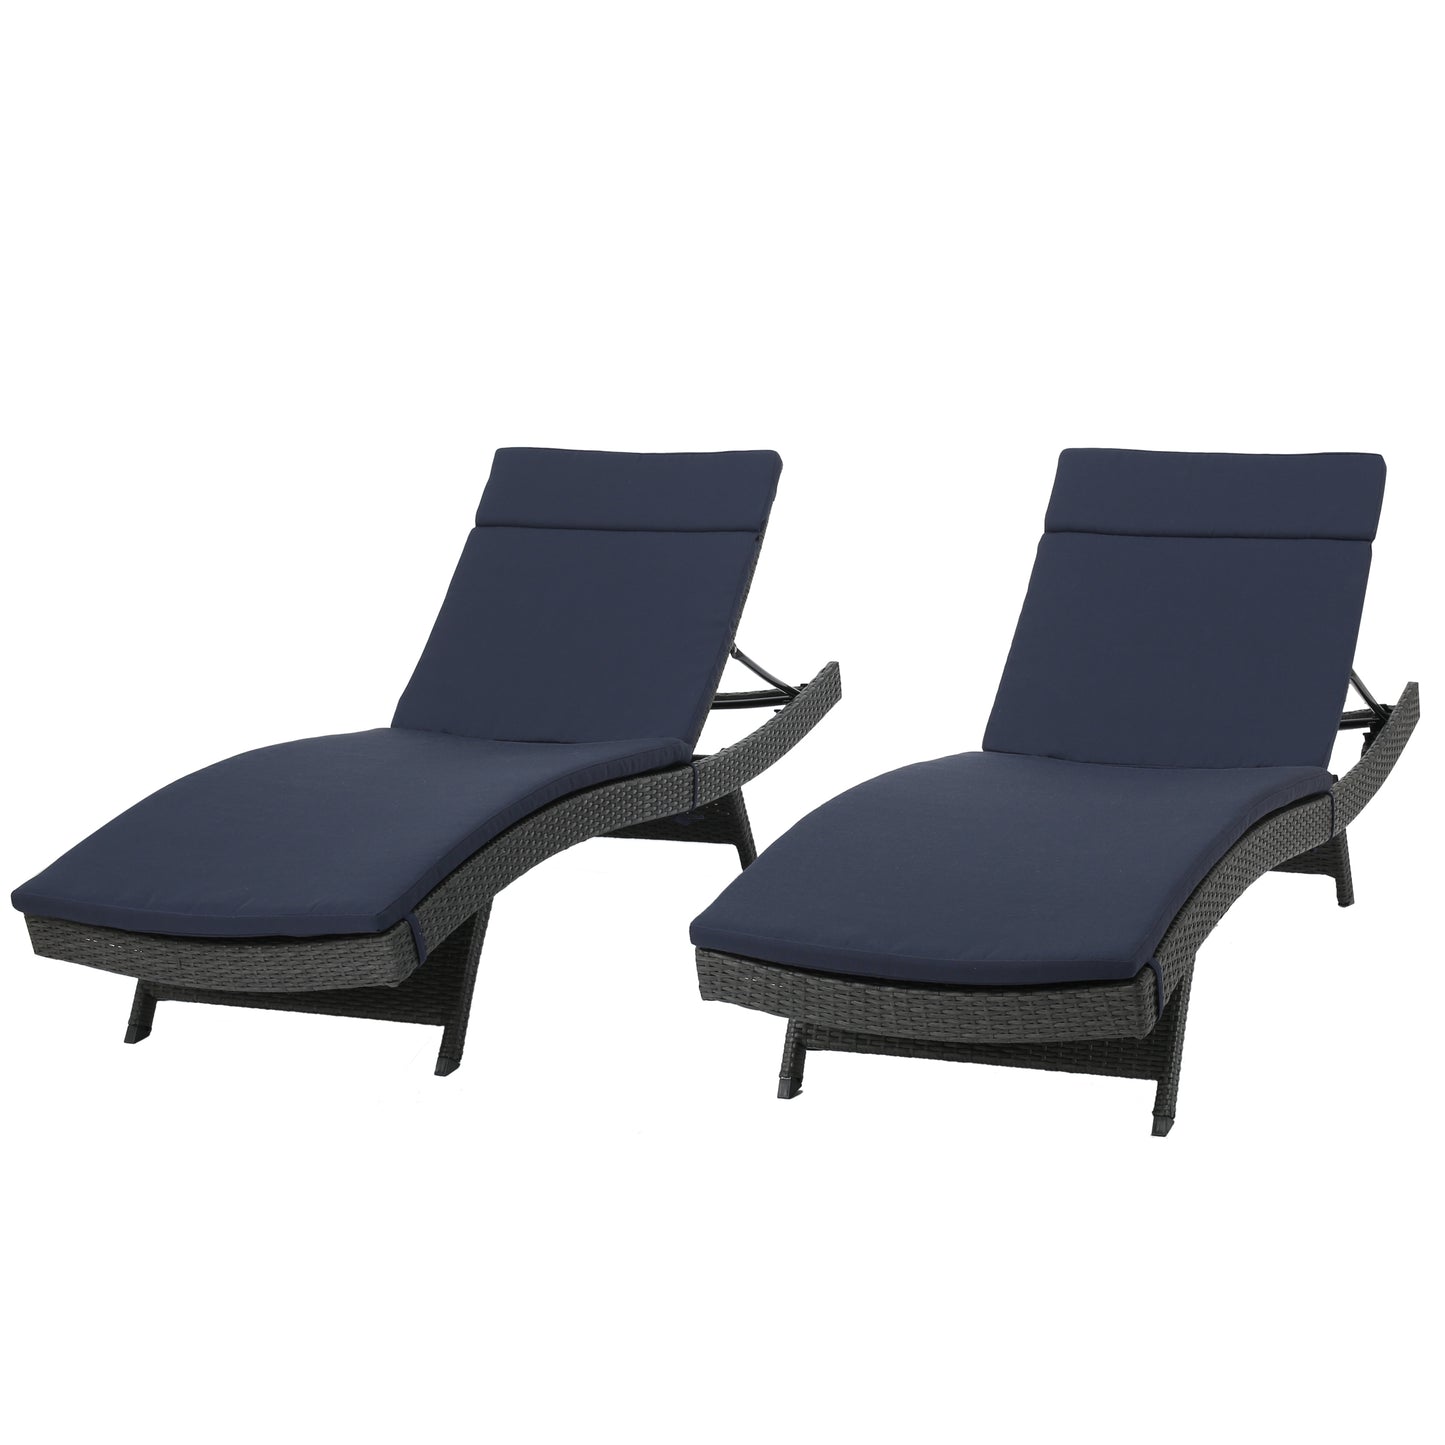 Nassau Outdoor Grey Wicker Adjustable Chaise Lounge with Cushion (Set of 2)